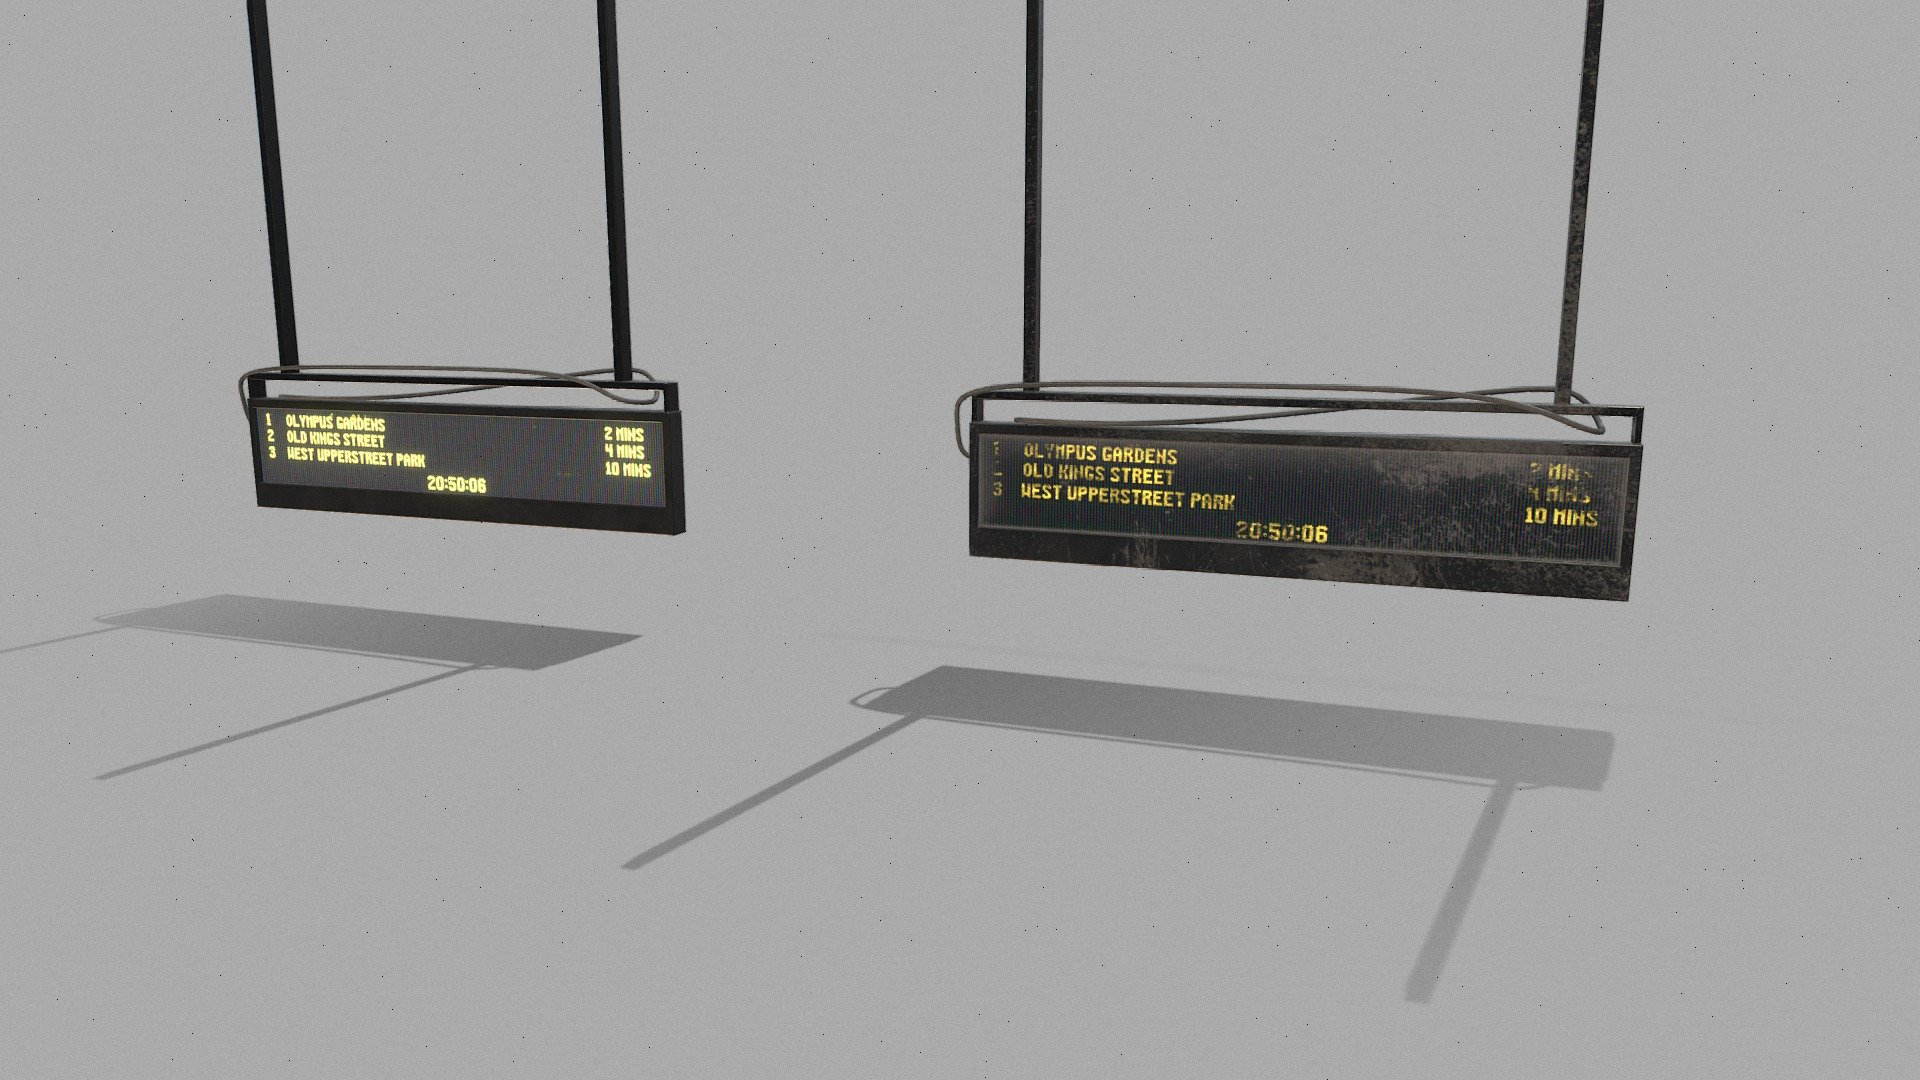 London underground style display boards, one verson is new and the other is worn.  Great prop for any sort of train station interior / post apocalyptic scene. 

PBR textures @4k - Digital train information board - Buy Royalty Free 3D model by Sousinho 3d model